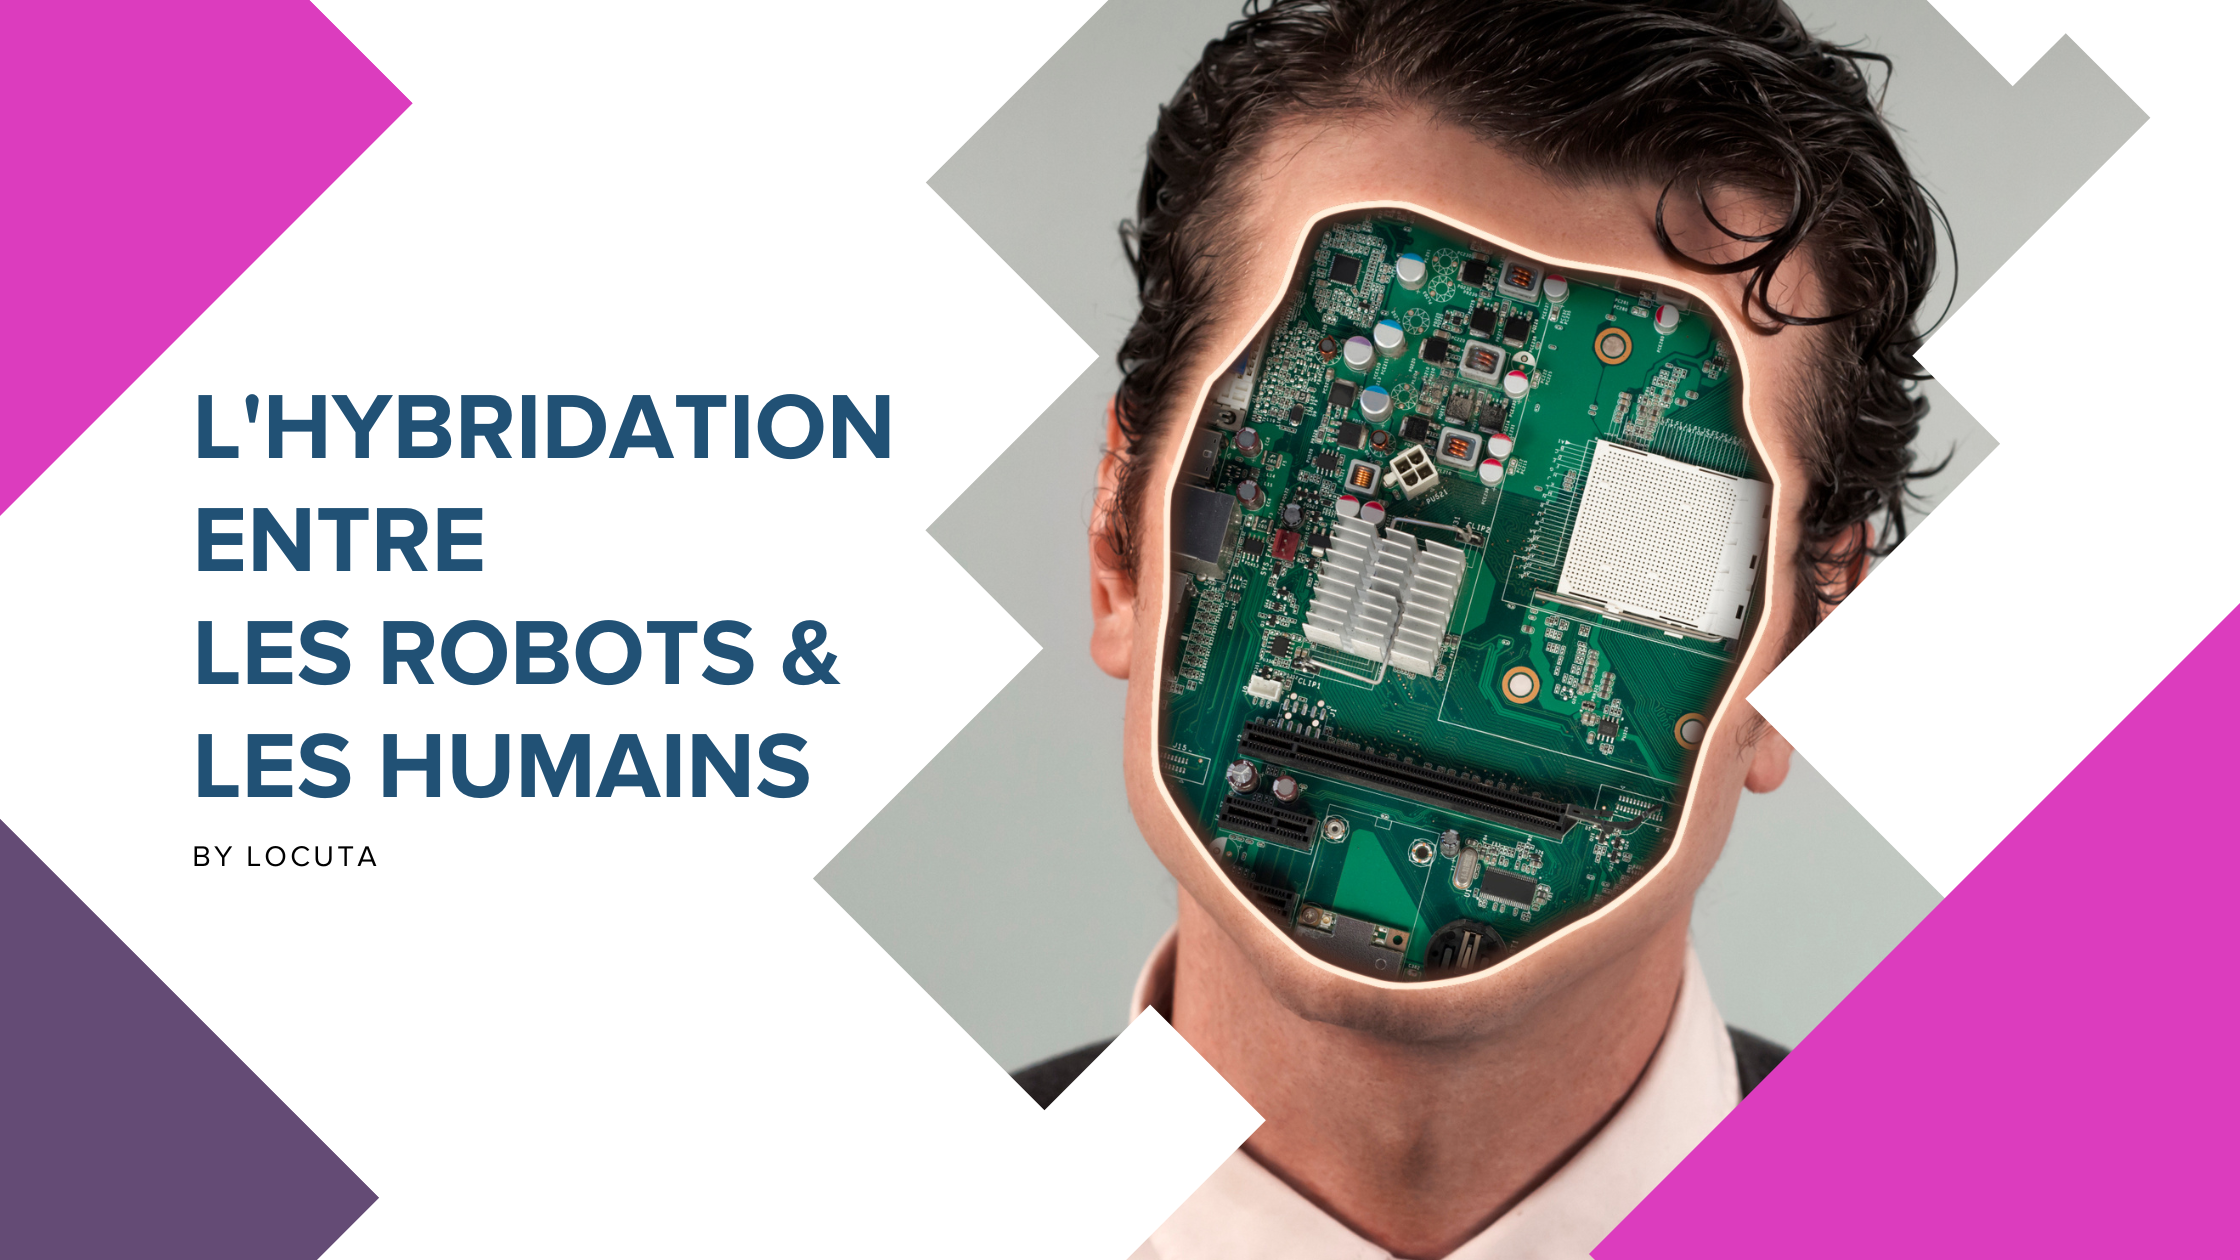 The hybridization between robots and humans